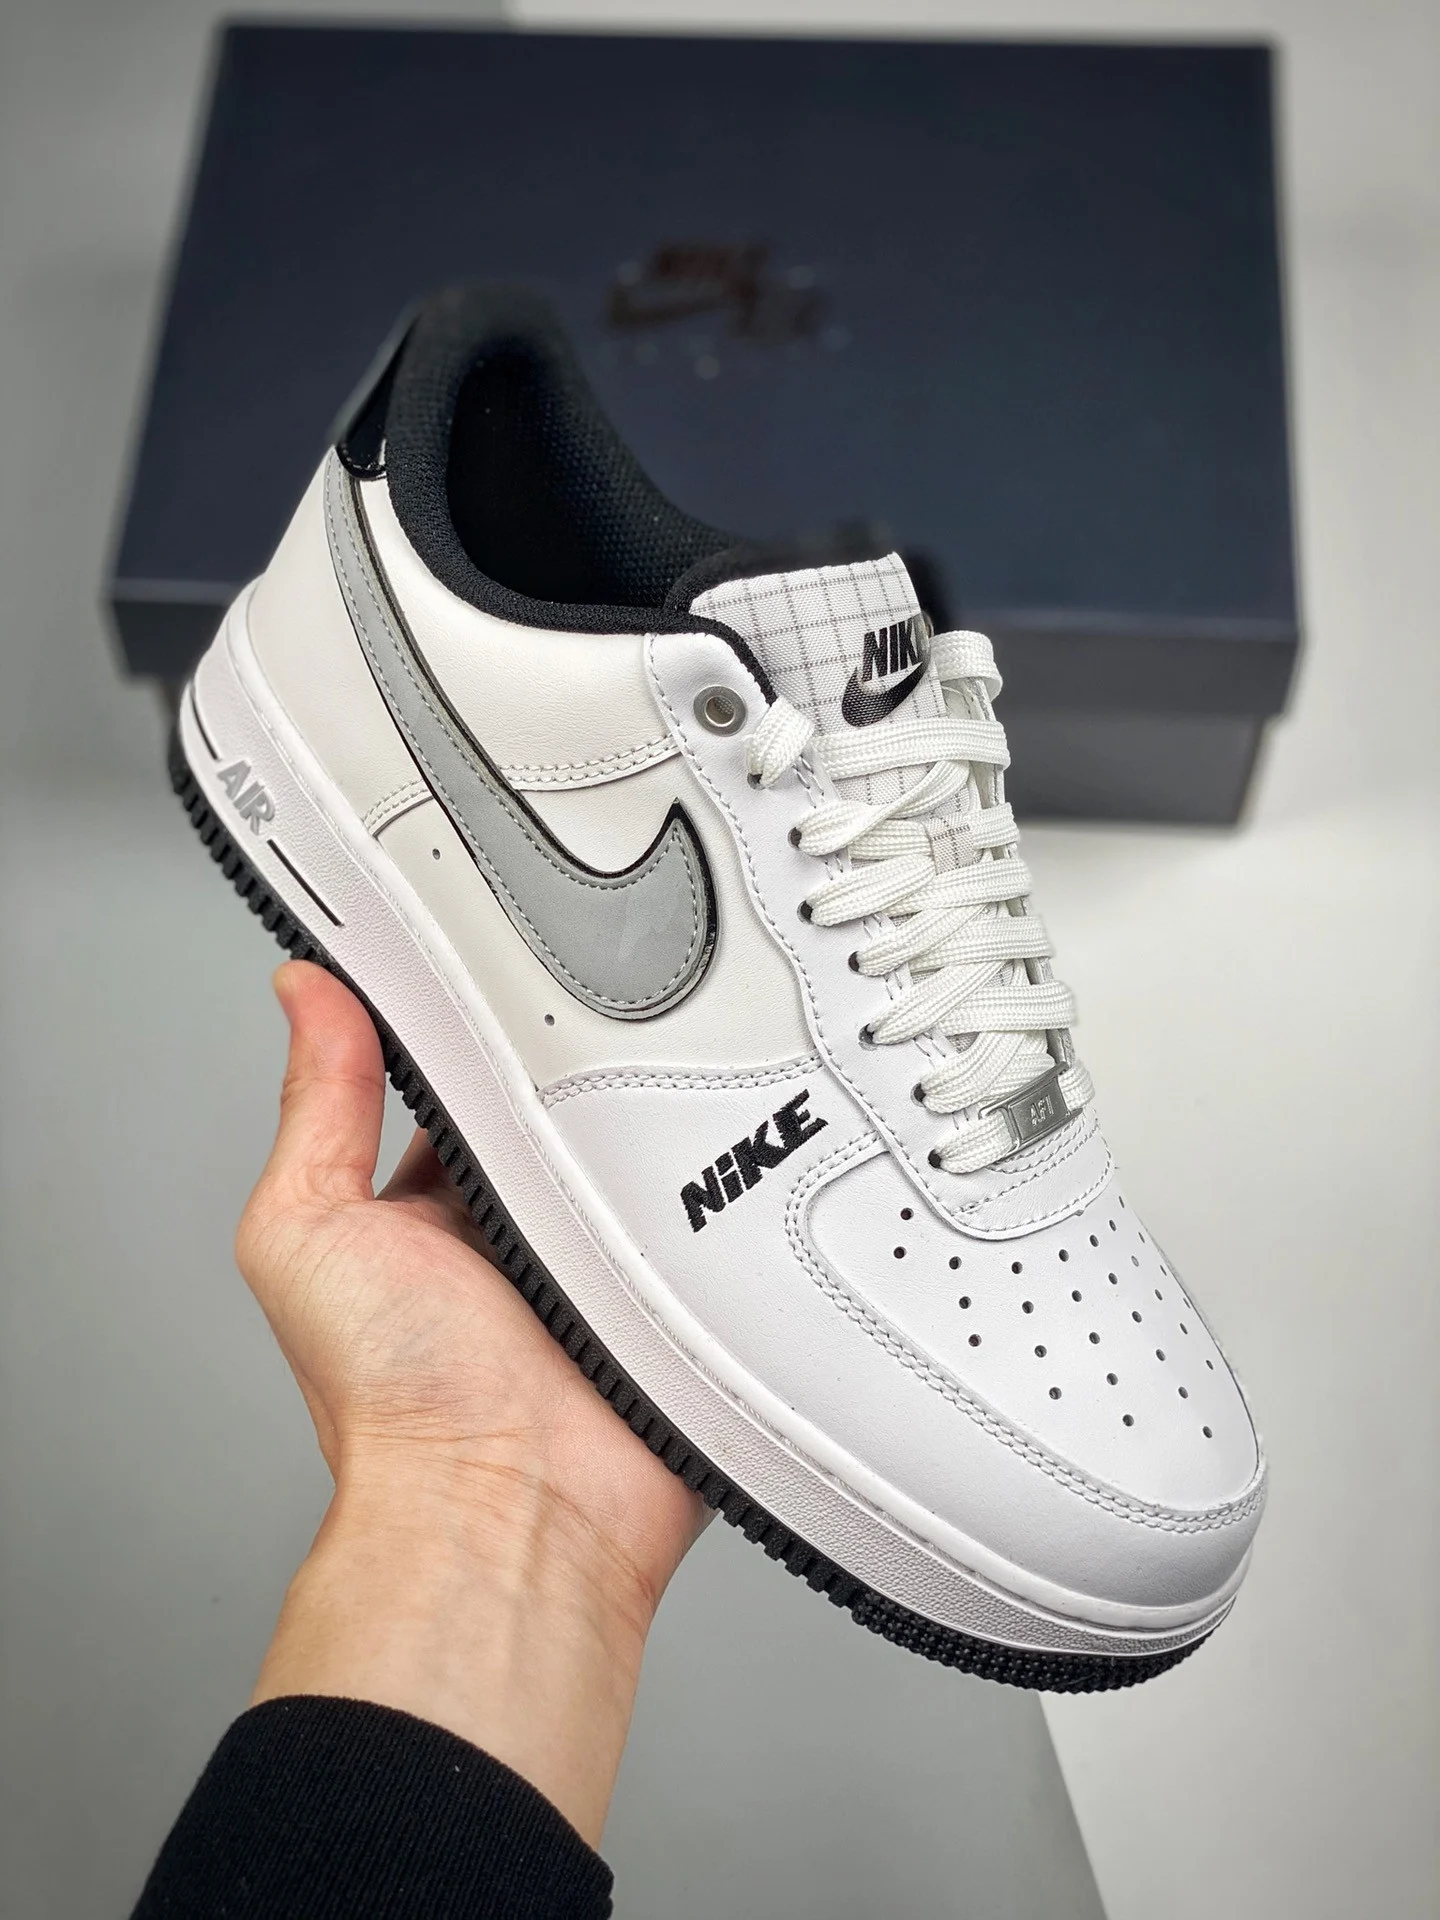 Nike Air Force 1 Low White Black DC8873-101 For Sale